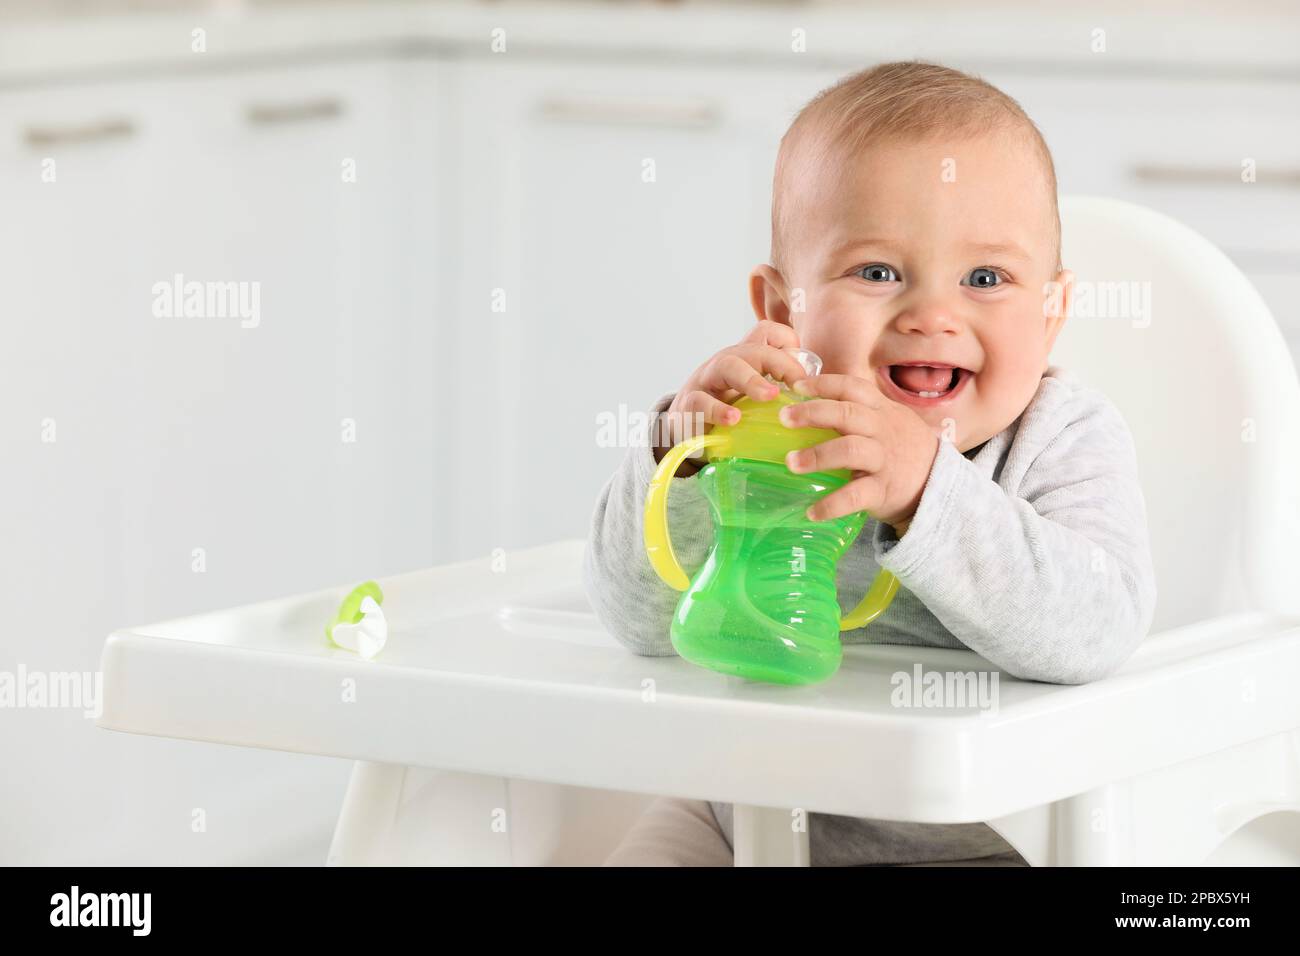 https://c8.alamy.com/comp/2PBX5YH/cute-little-baby-with-sippy-cup-at-home-space-for-text-2PBX5YH.jpg